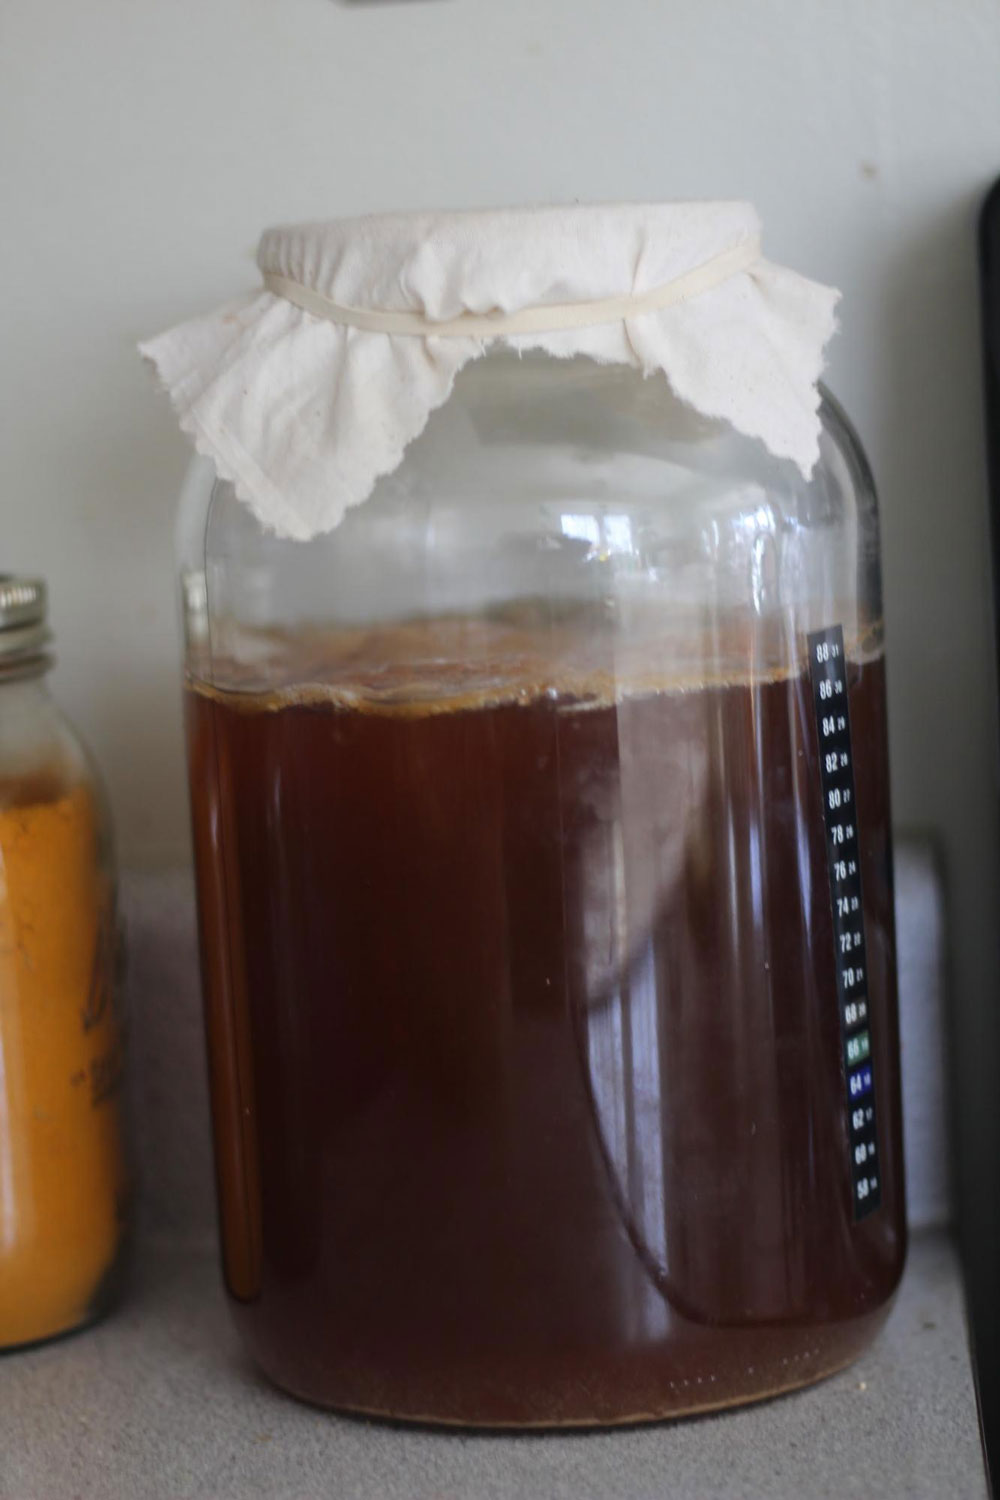 By day 7, the Kombucha smells like vinegar and has a thick foam on the top